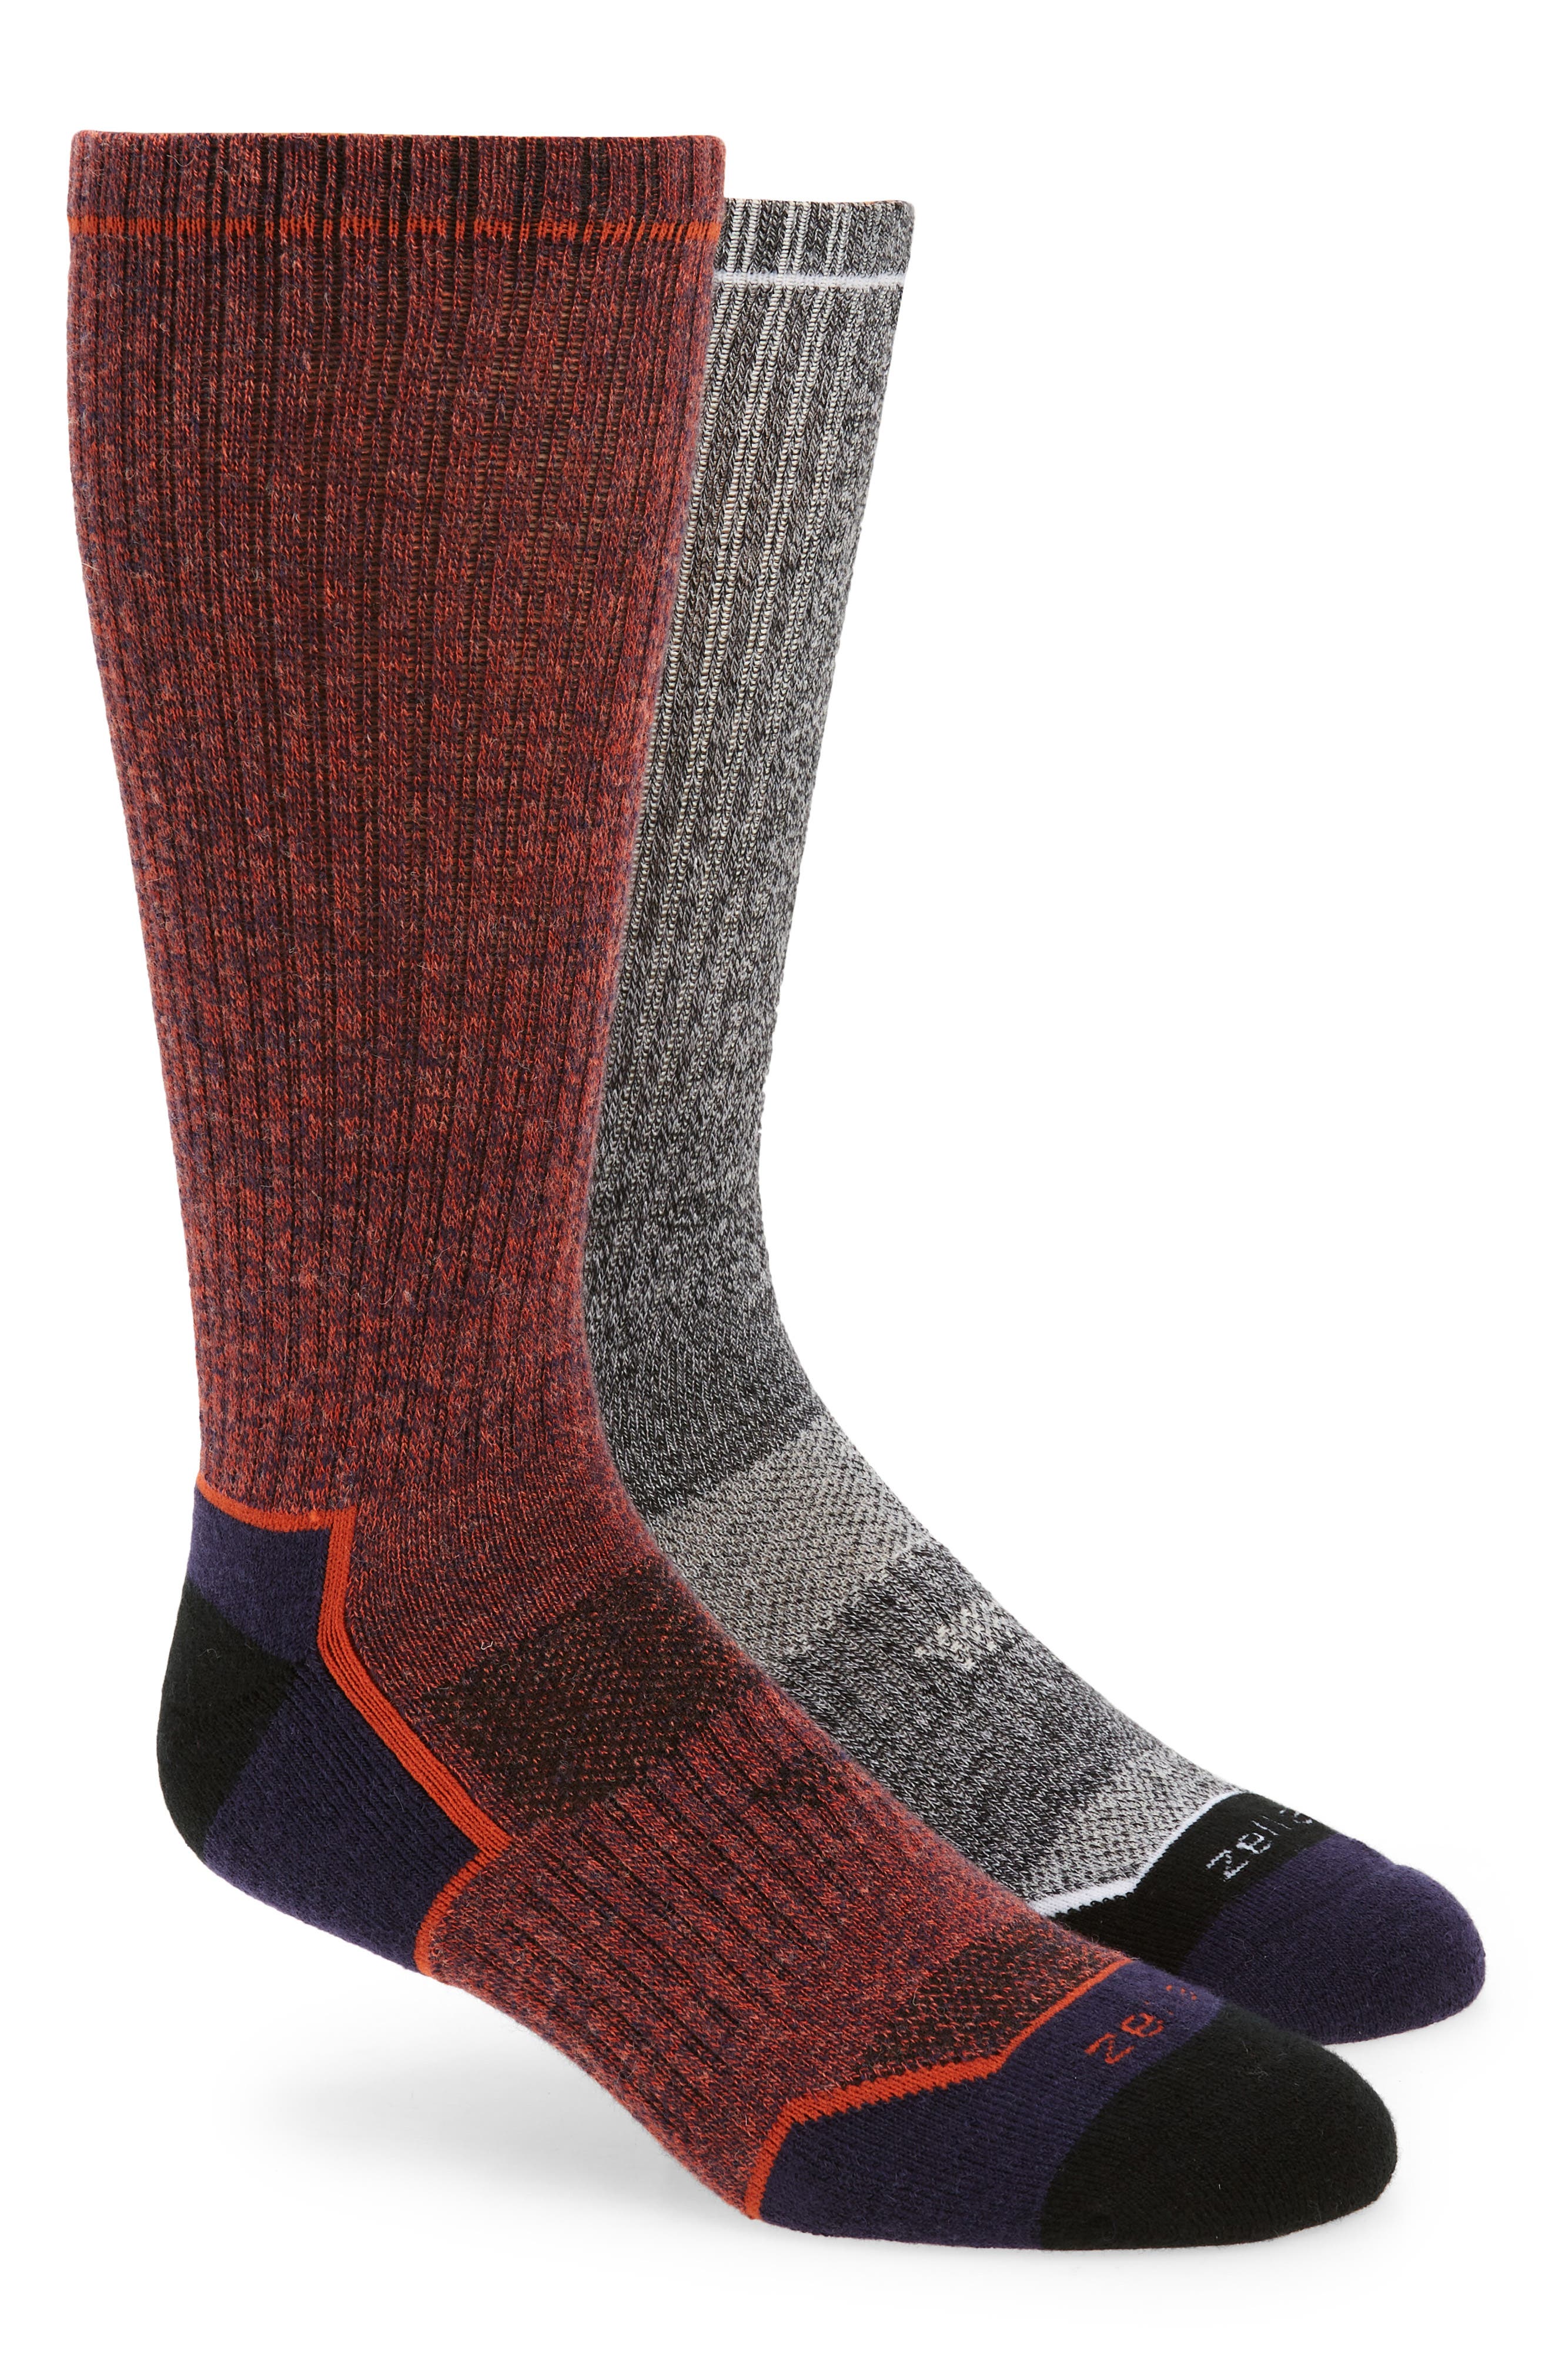 ZELLA Assorted 2-Pack Hiking Crew Socks in Blue Twilight- Coral